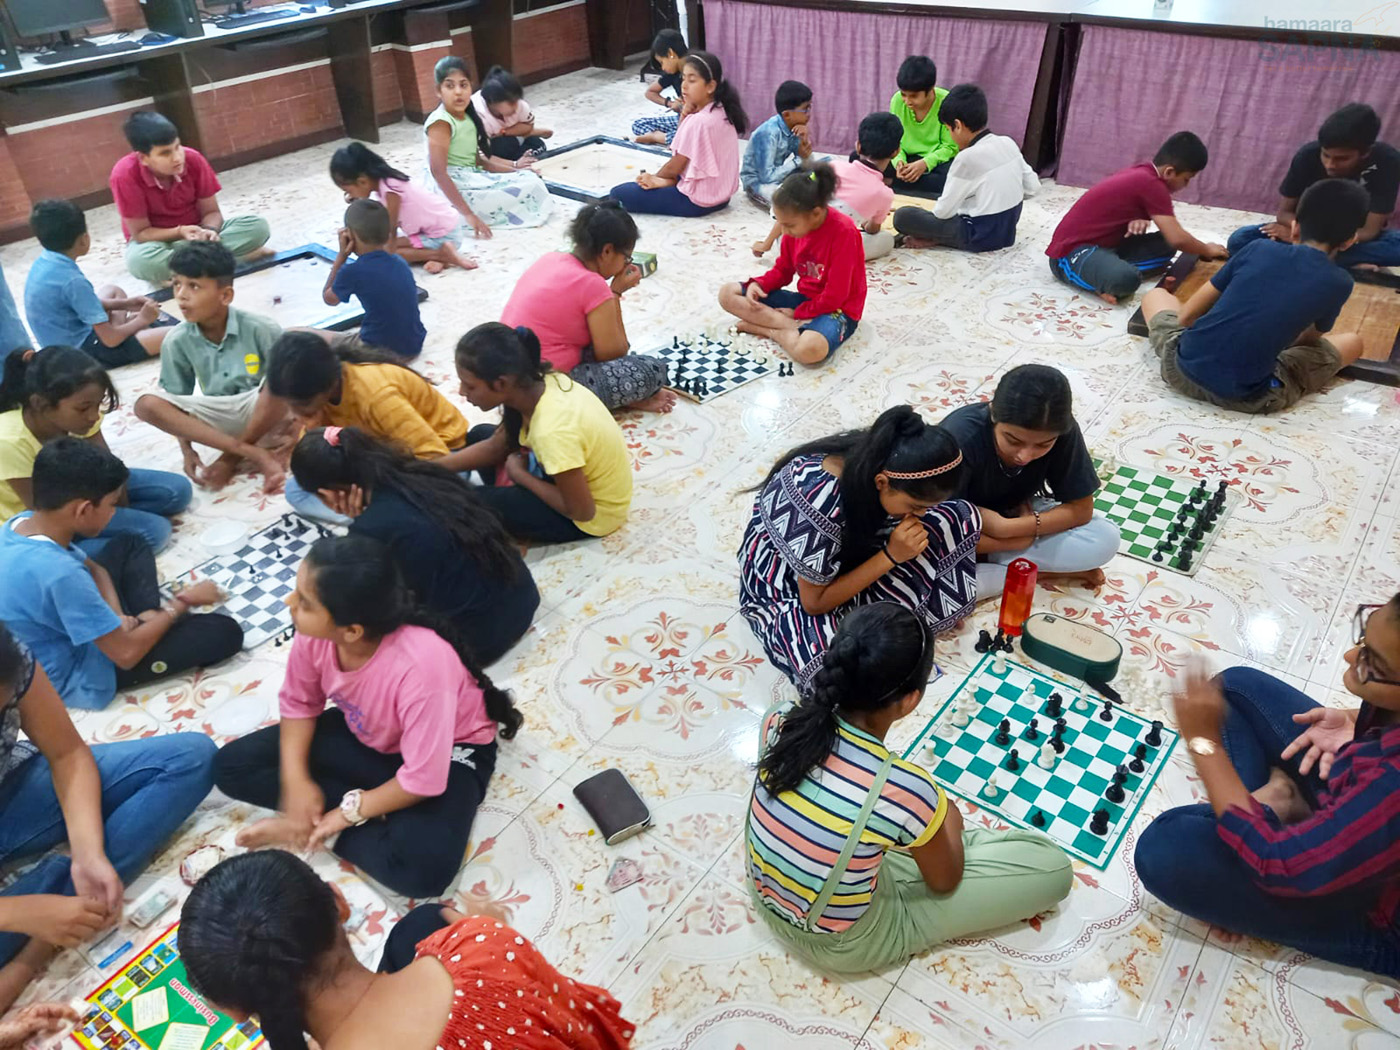 Kids immersed in the strategic world of chess, Checkmating challenges with every move! ♟️🧒